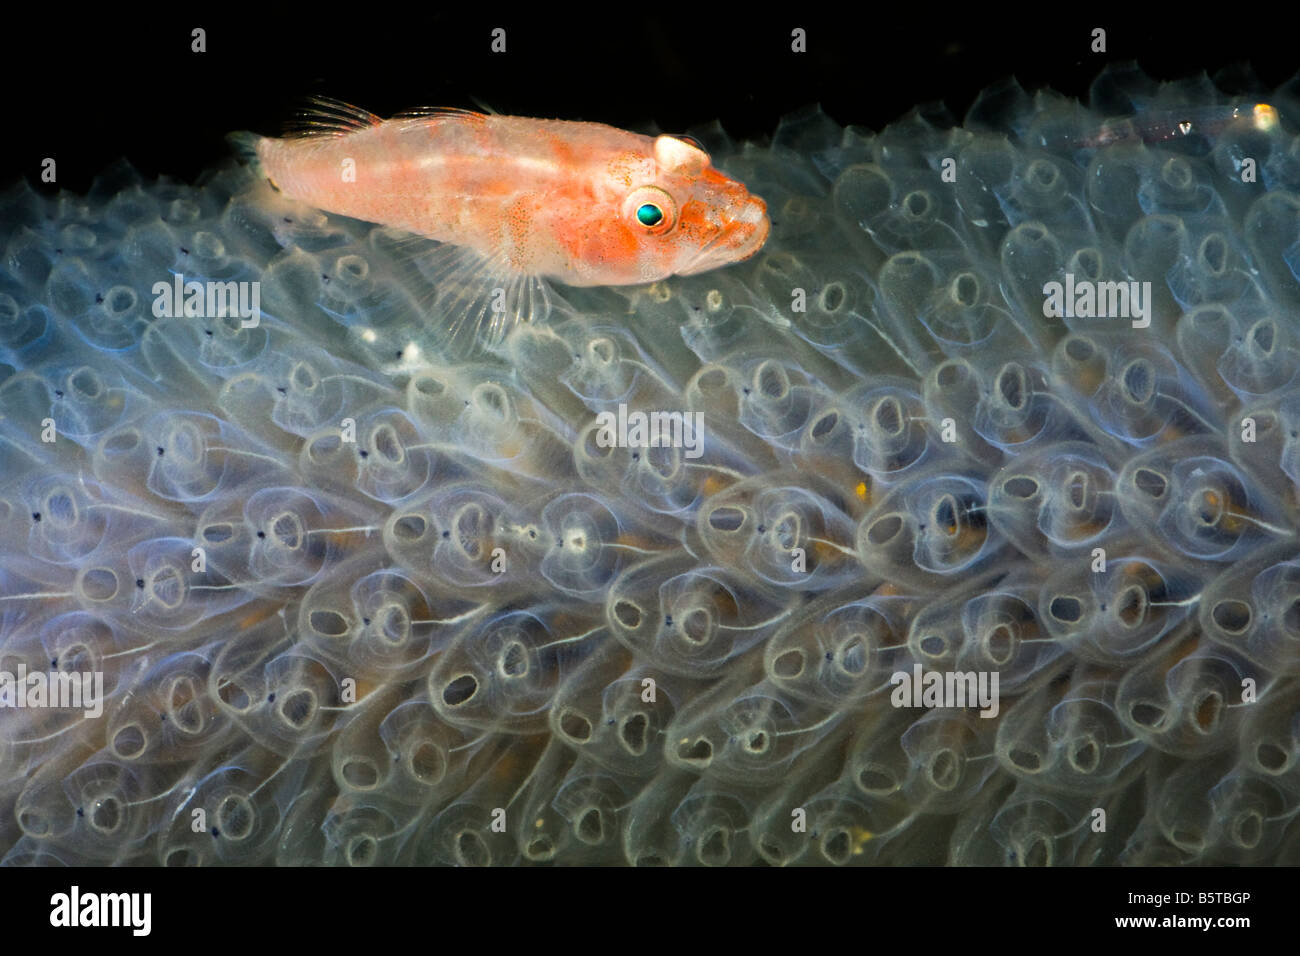 This goby, Pleurosicya sp, was photographed at night on a colony of transparent tunicates, Komodo, Indonesia. Stock Photo